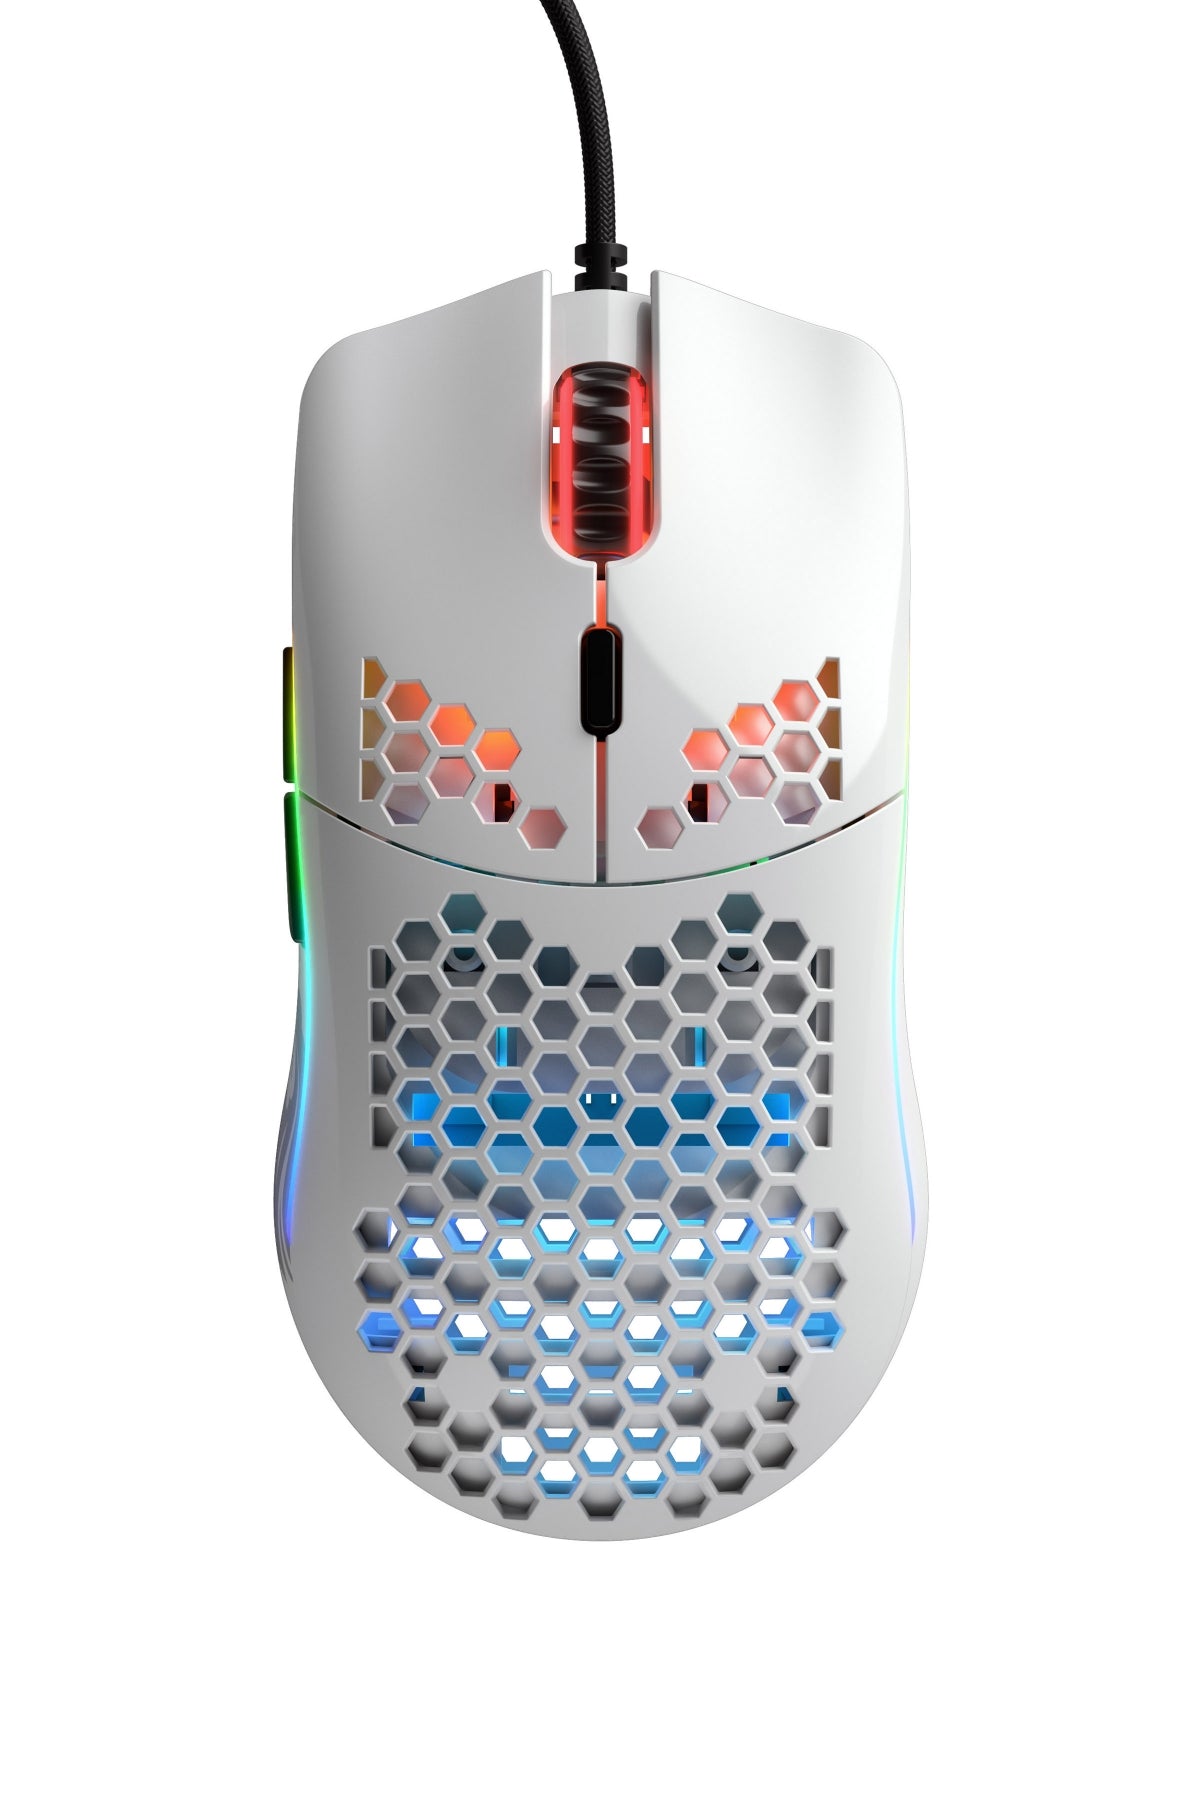 Glorious PC Model O Glossy White Lightweight Gaming Mouse MKZ6RAROY0 |0|